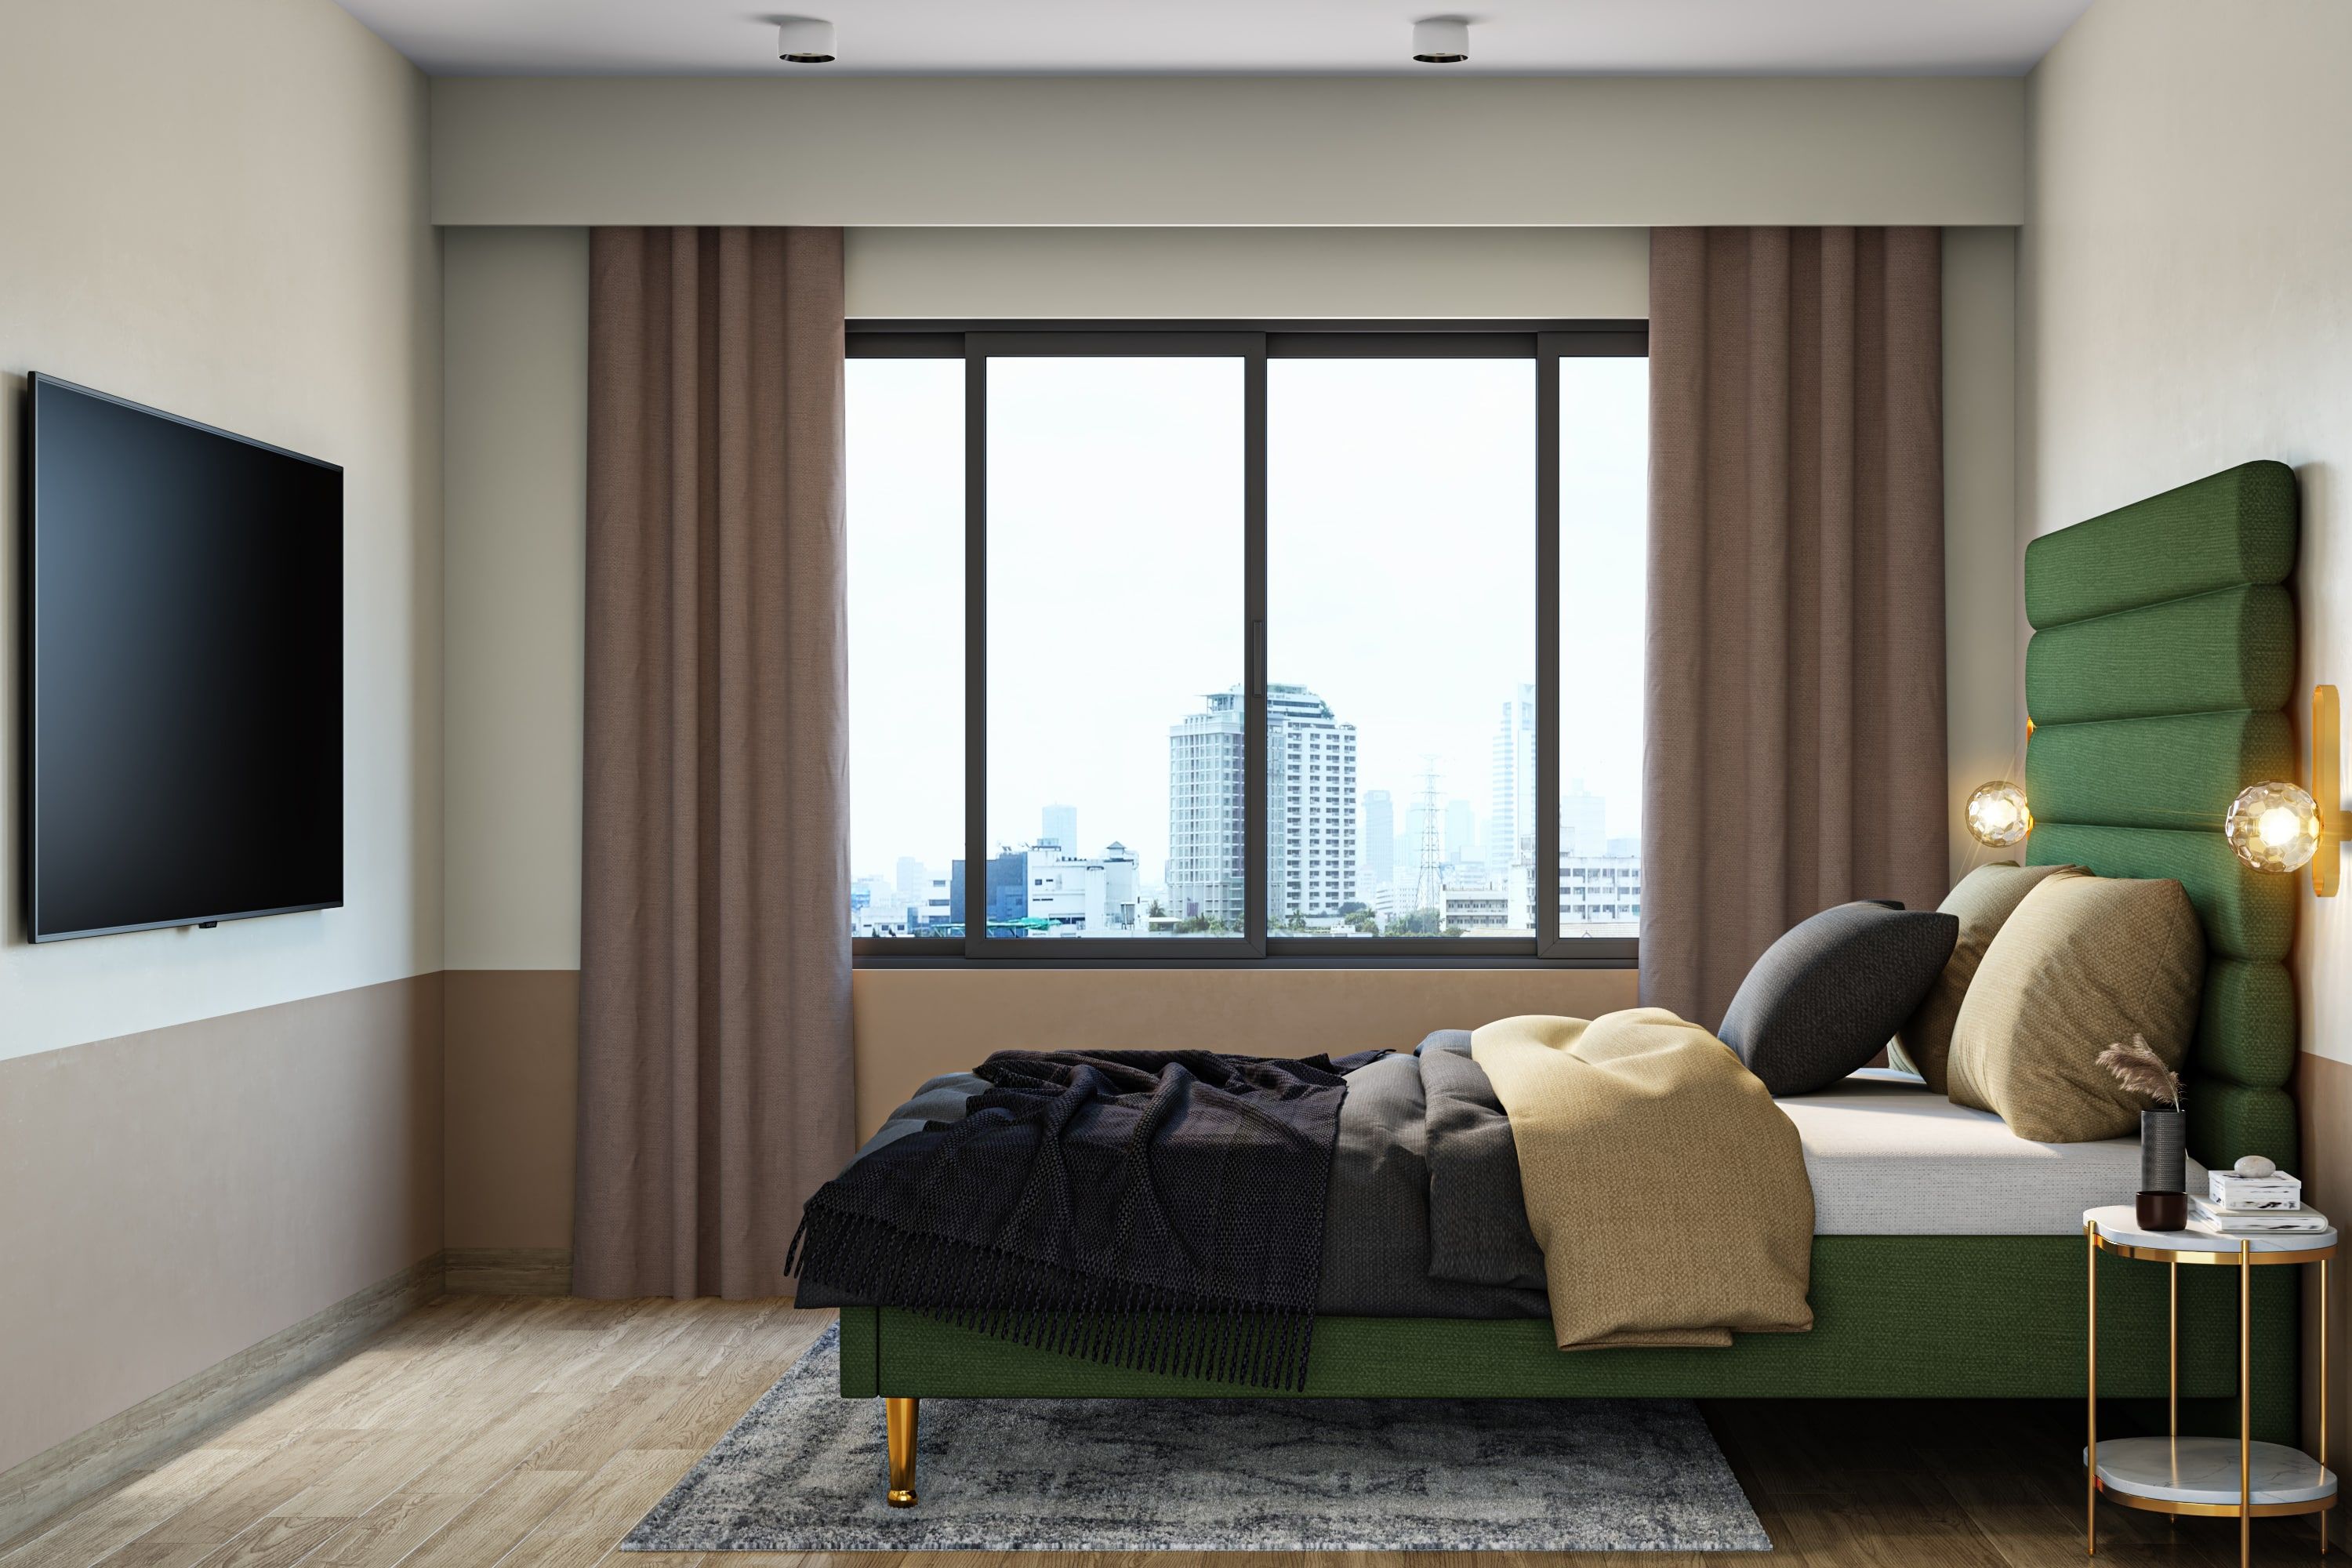 Contemporary Bedroom Design With A Green Double Size Bed